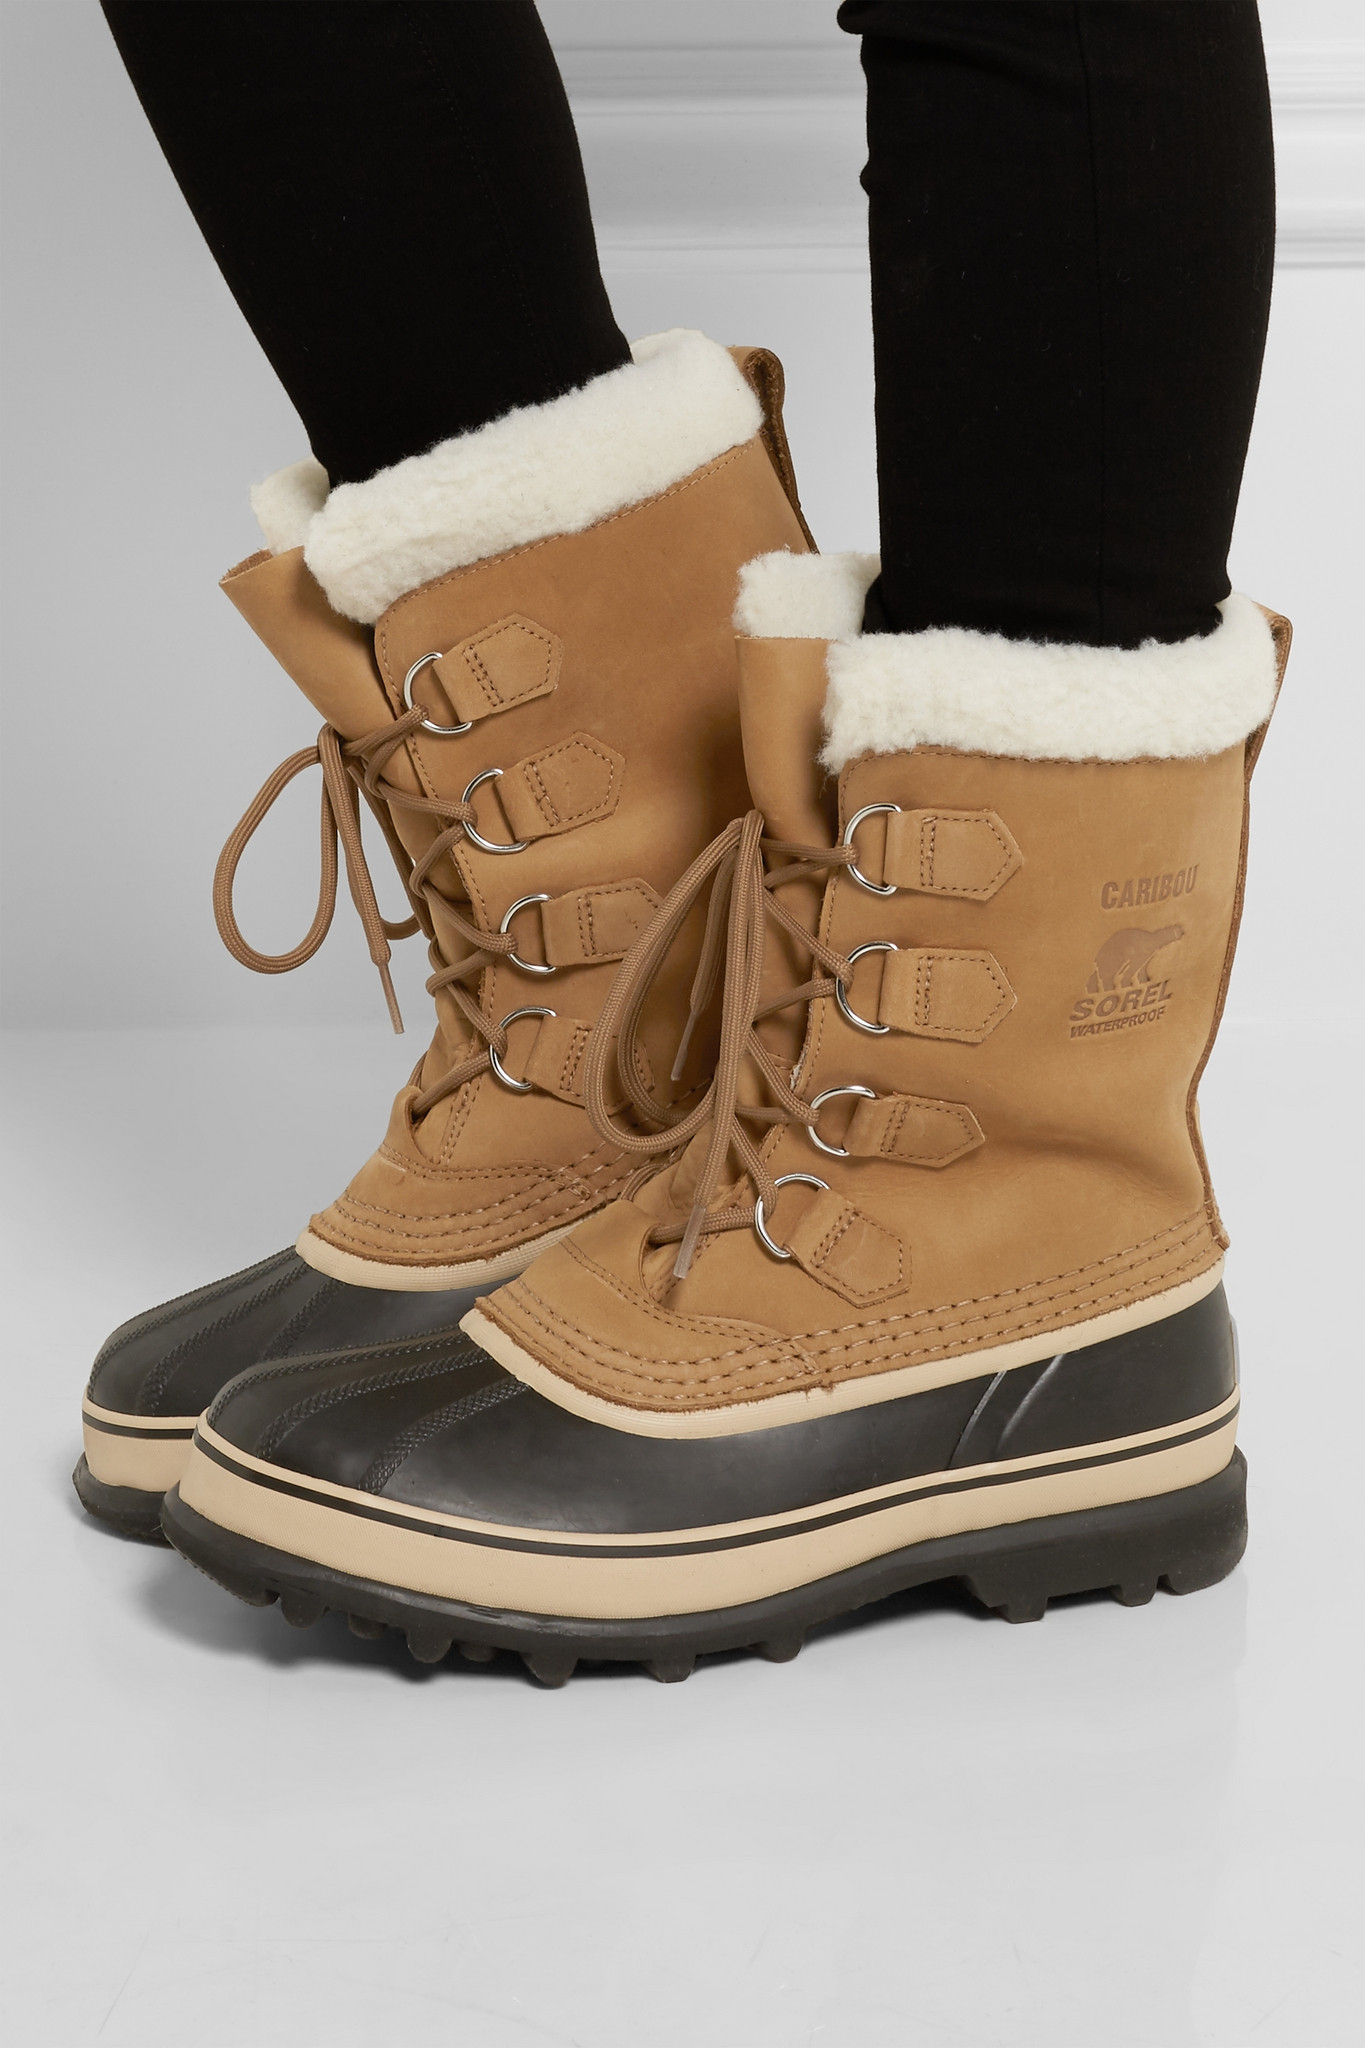 Lyst - Sorel Caribou Waterproof Suede And Rubber Boots in Brown